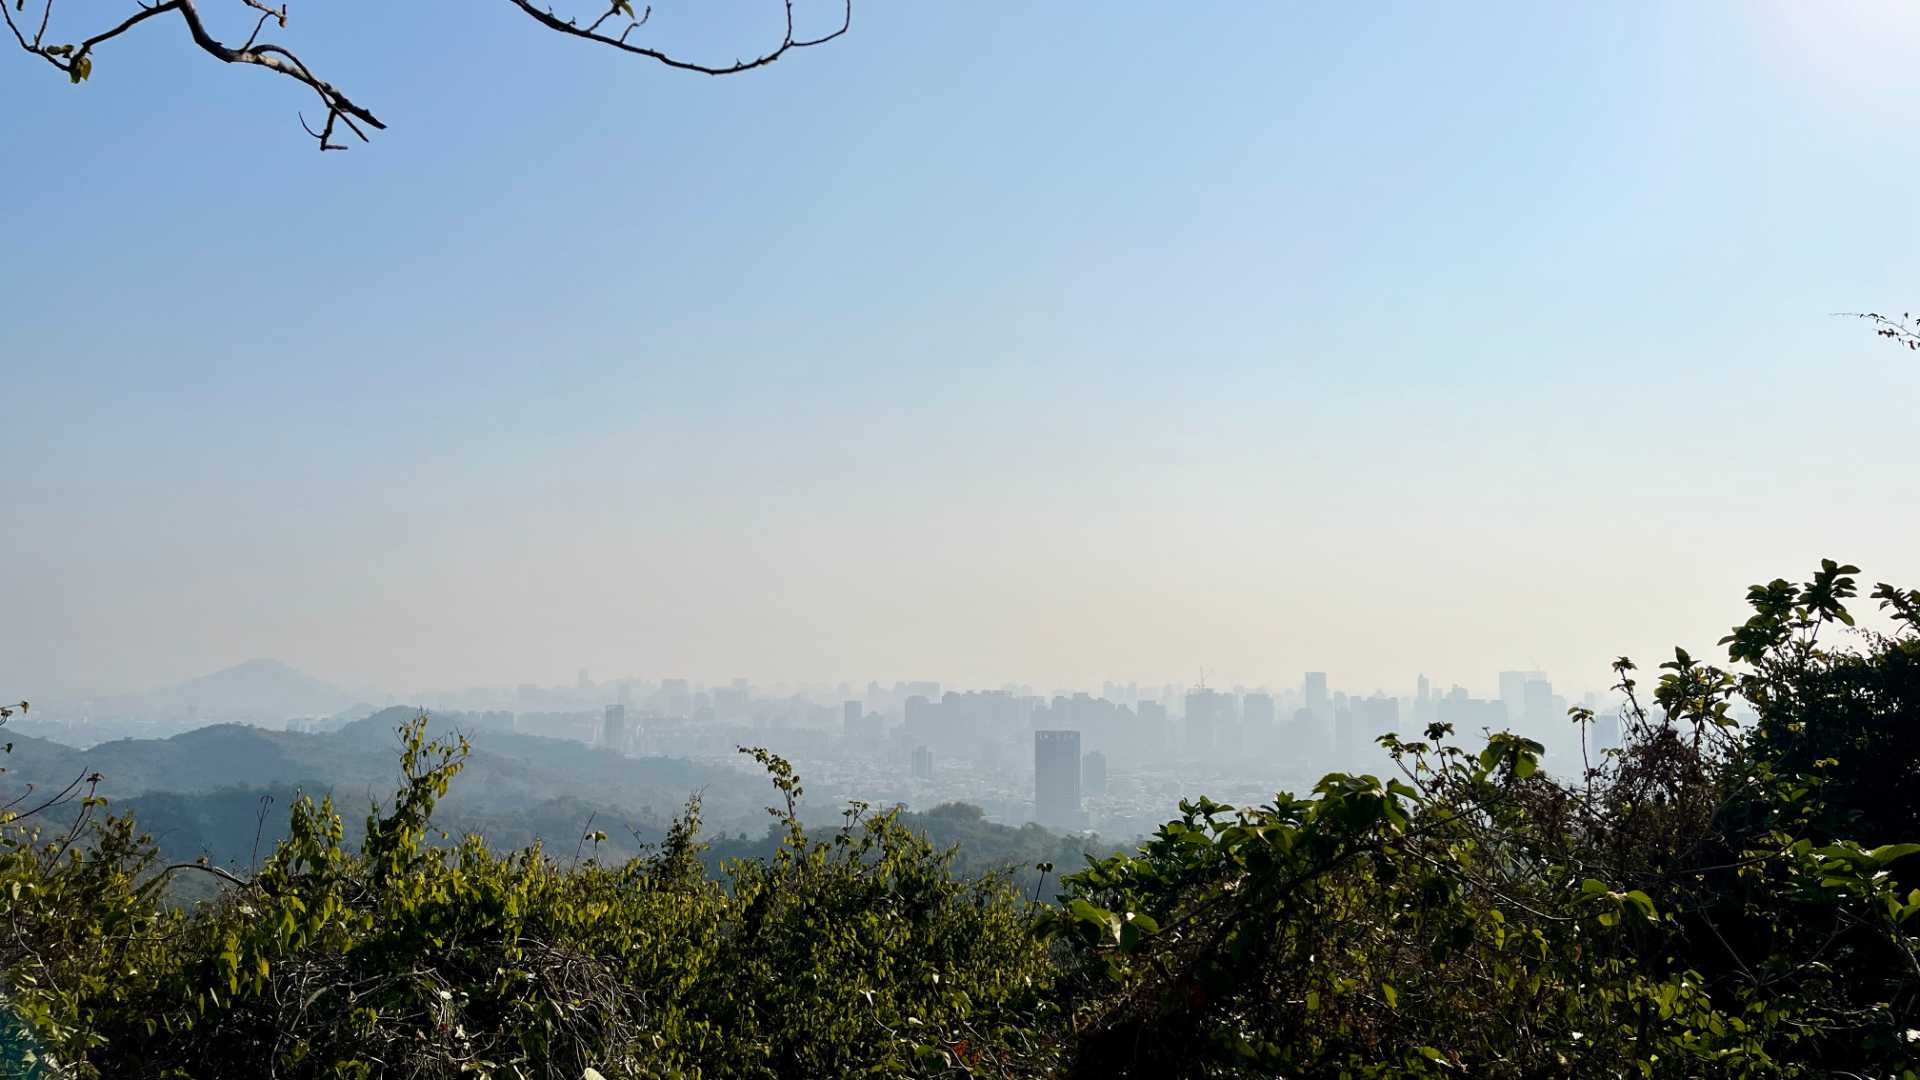 View of Kaohsiung from Monkey Mountain. The city buildings are hazy, in smog.